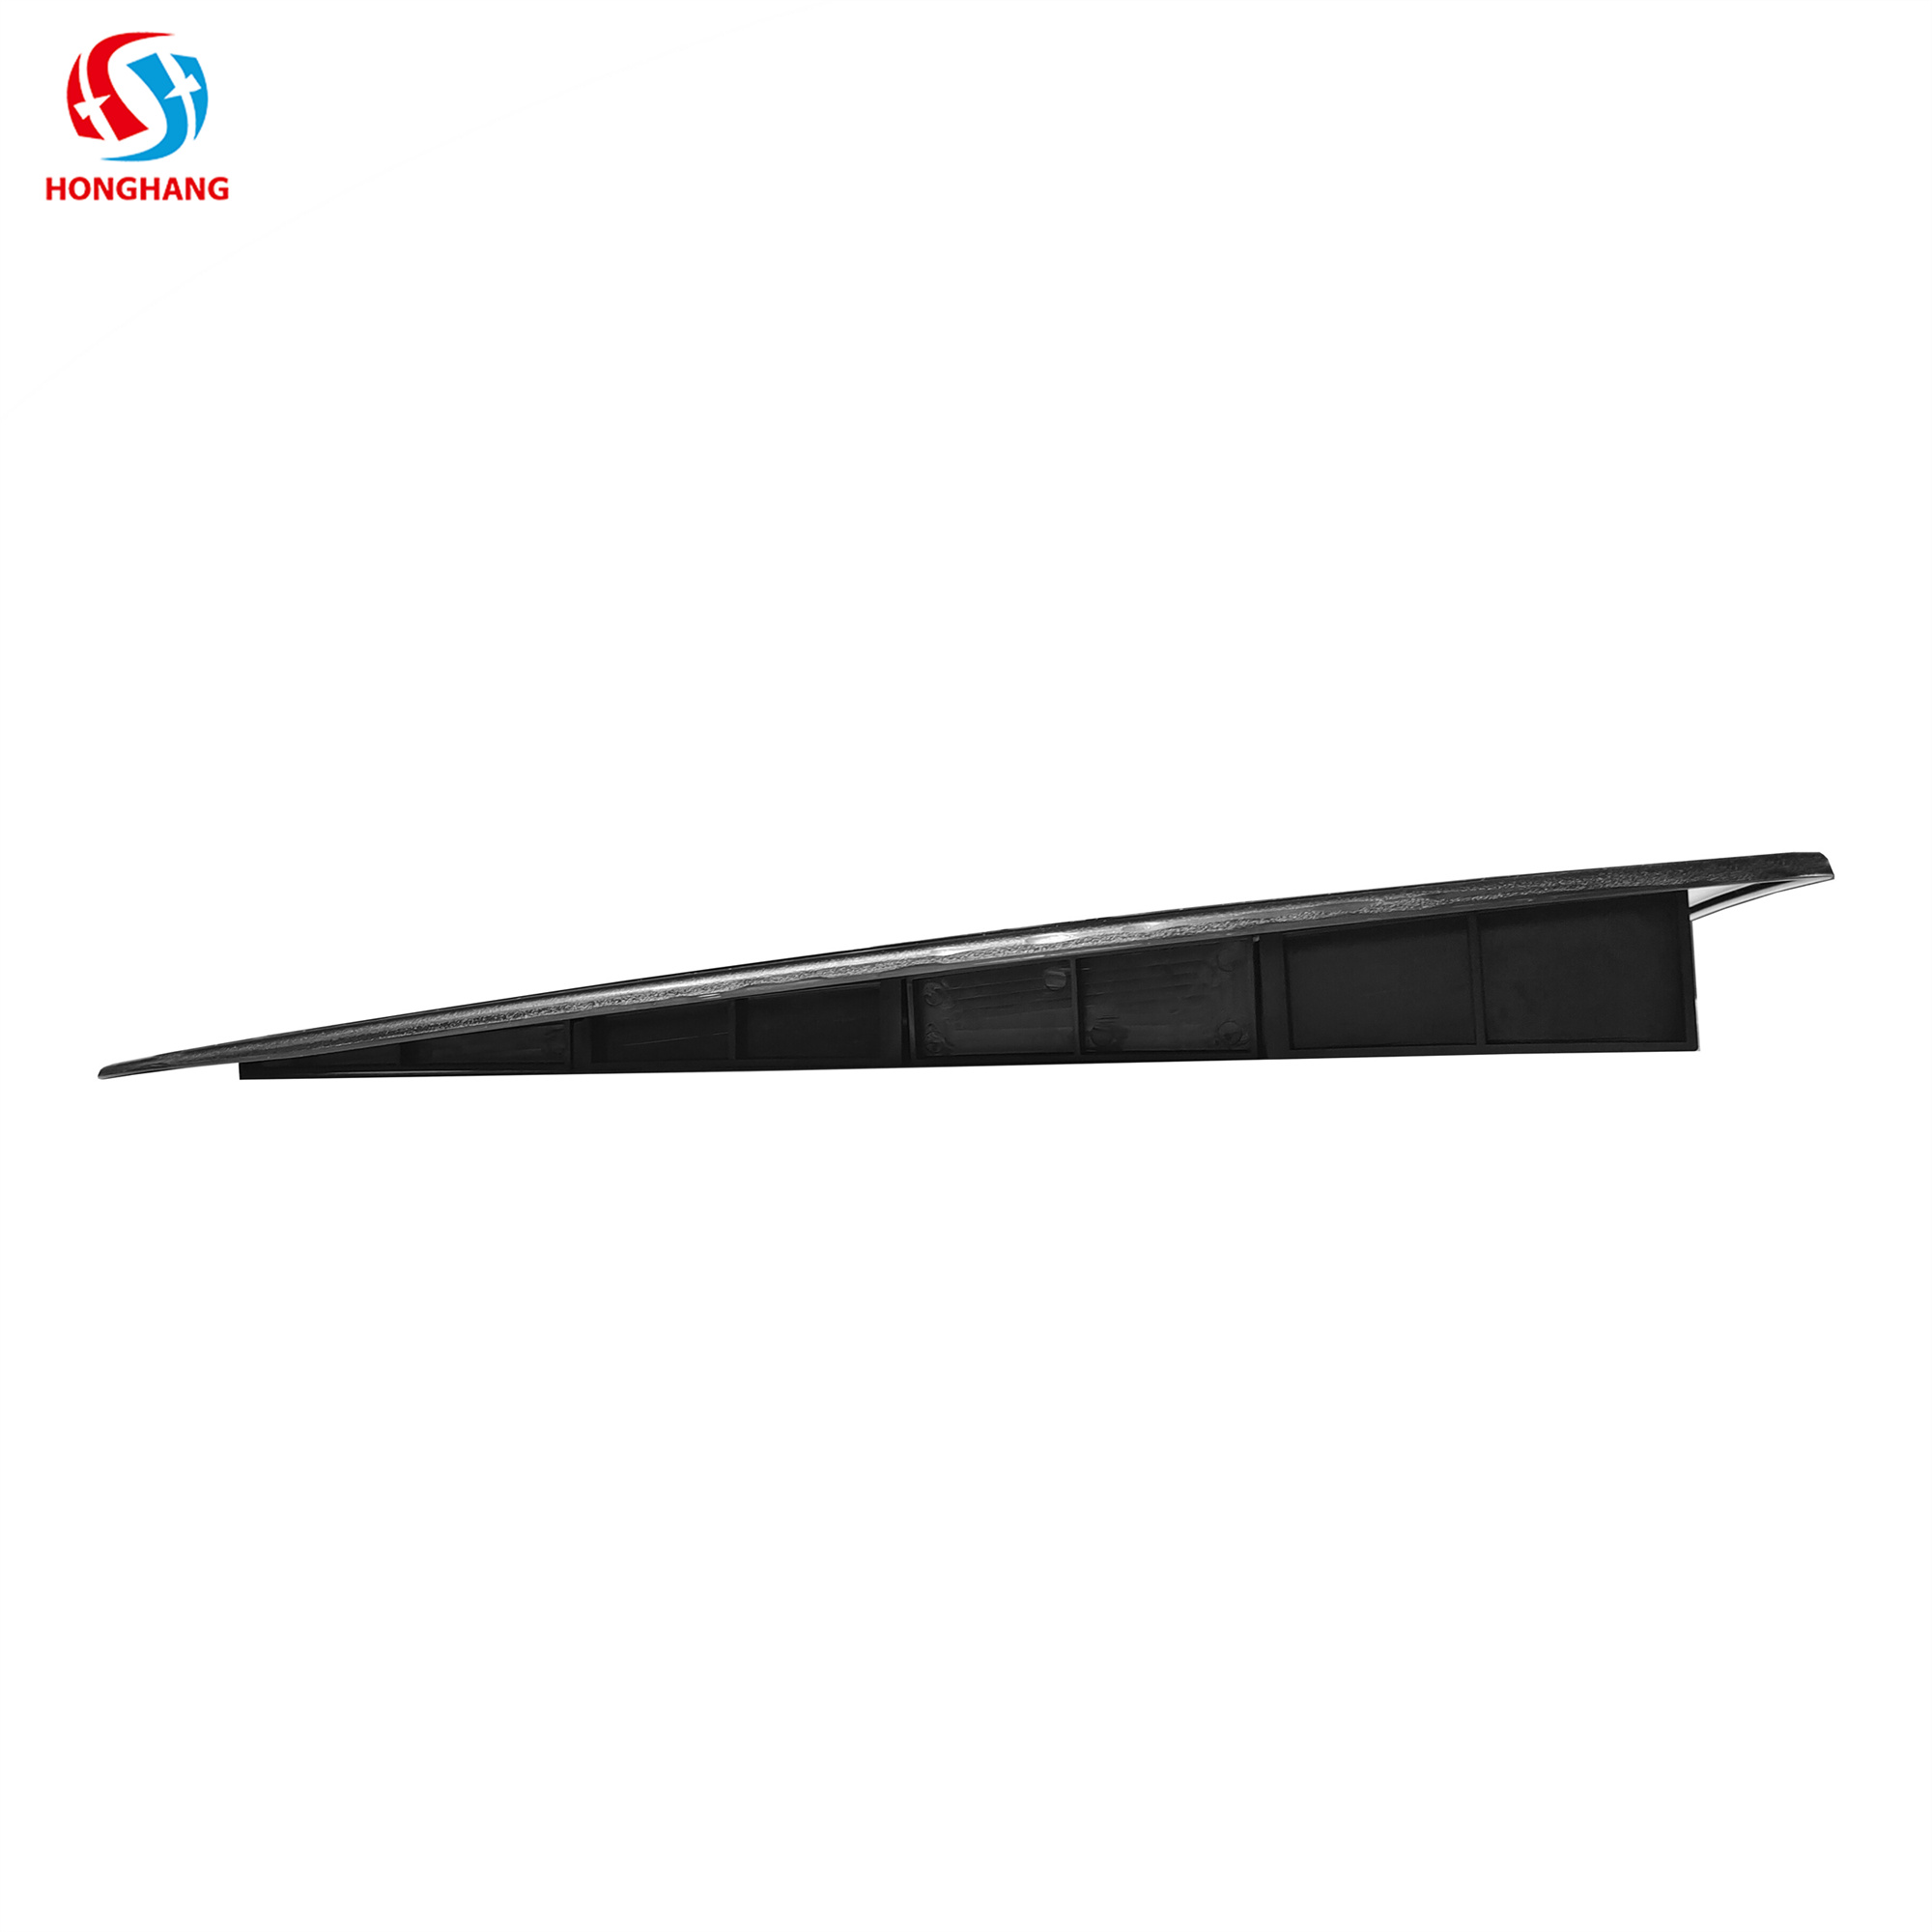 Universal ABS Car Sunroof Cover For All Cars